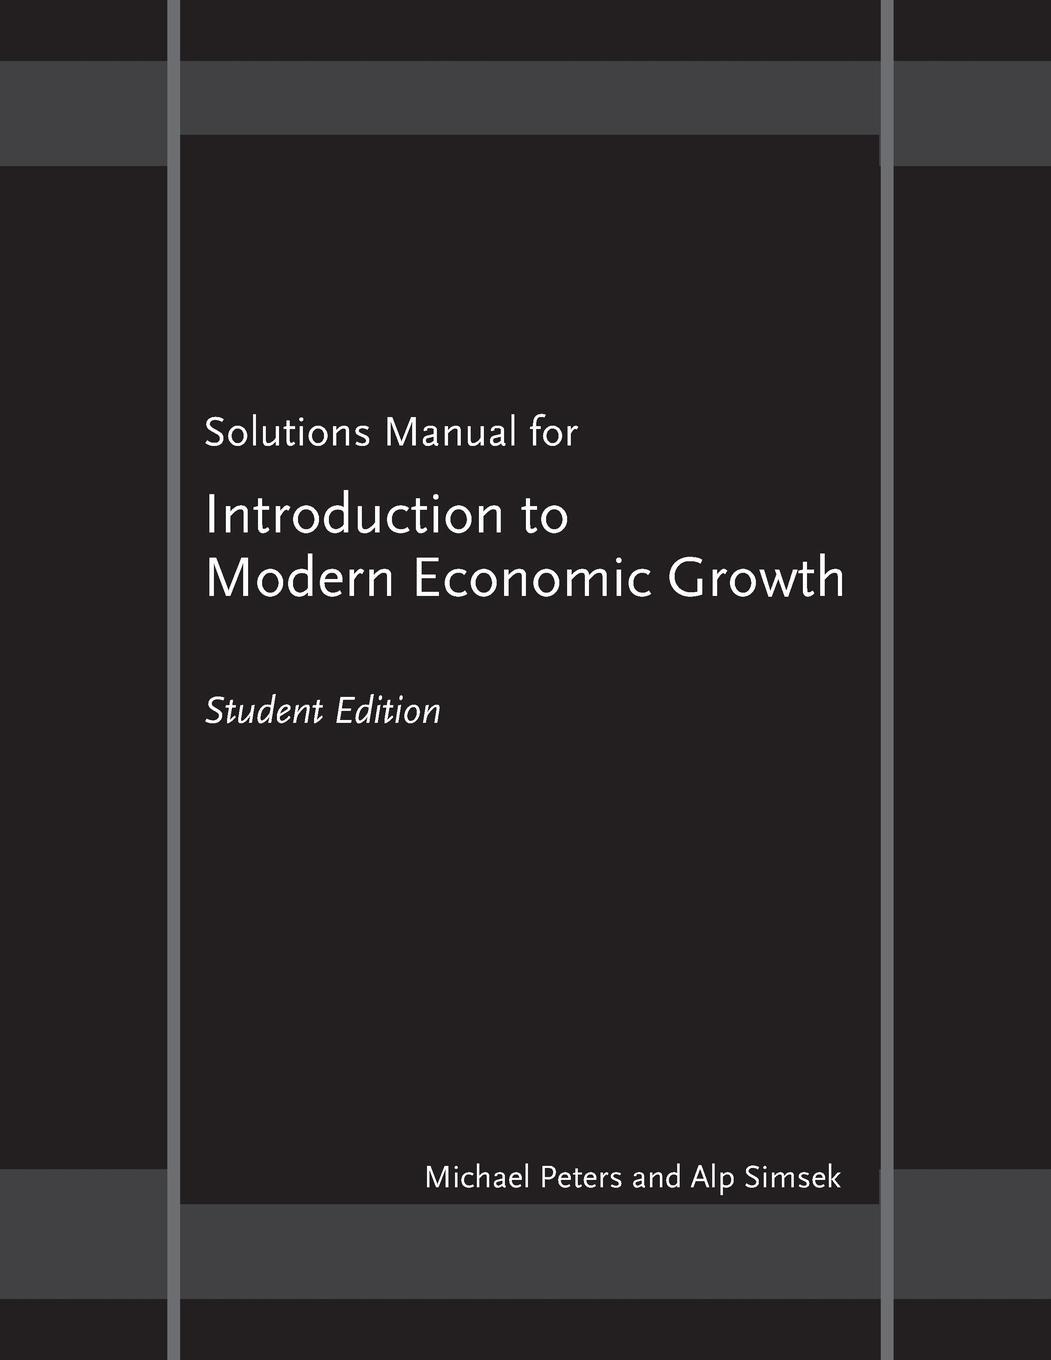 Cover: 9780691141633 | Solutions Manual for "Introduction to Modern Economic Growth" | Peters